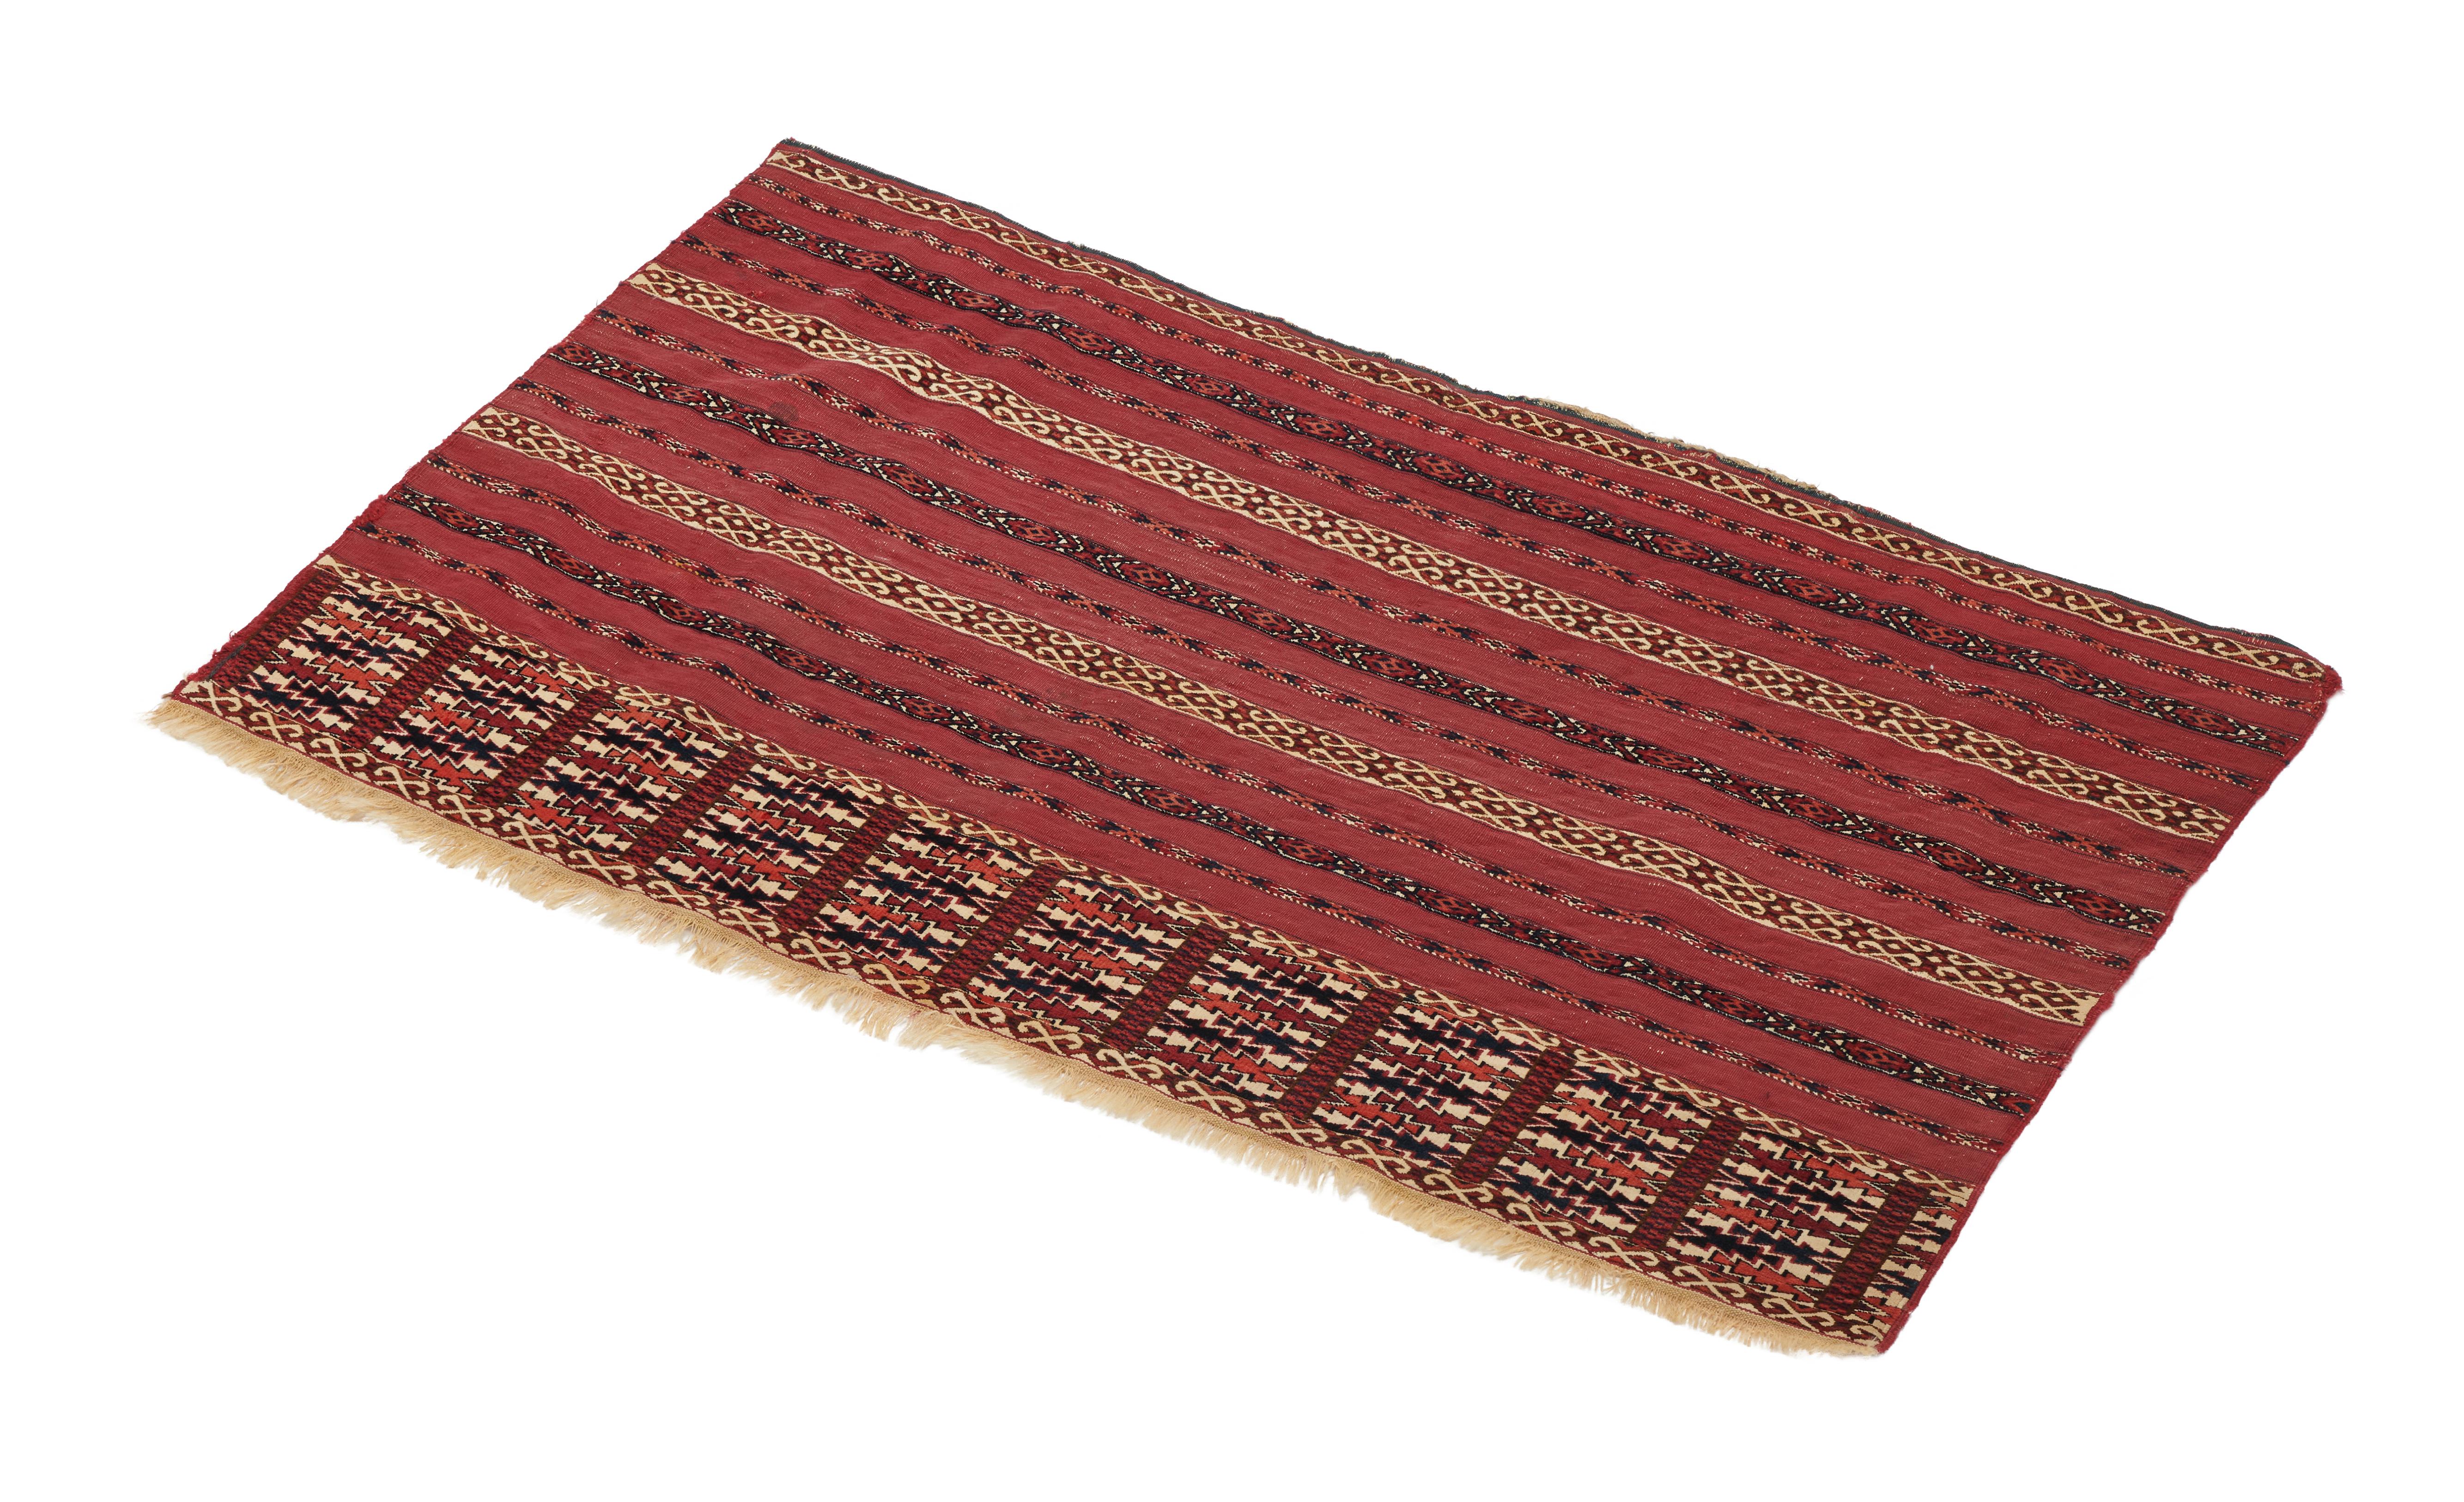 The rectangular carpets such as this one were created by every Turkmen tribe. They were the primary floor covering used in Turkmen tents, and were decorated with the main gul, the most important symbol used for each tribe. The nomadic Turkmen of